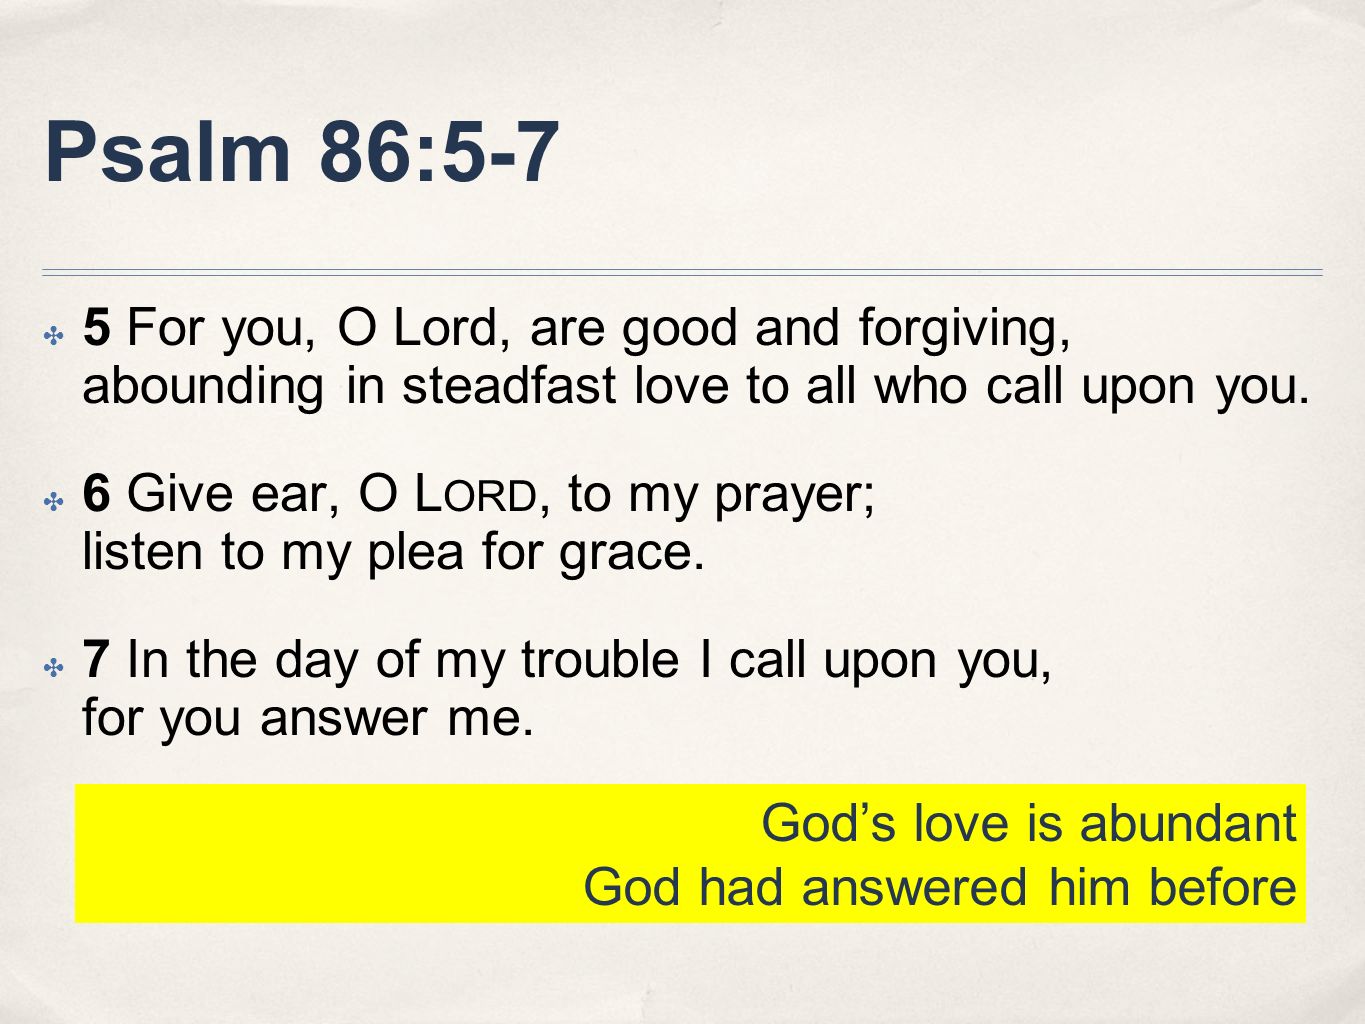 Psalm 86:5-7 5 For you, O Lord, are good and forgiving, abounding in steadfast love to all who call upon you.